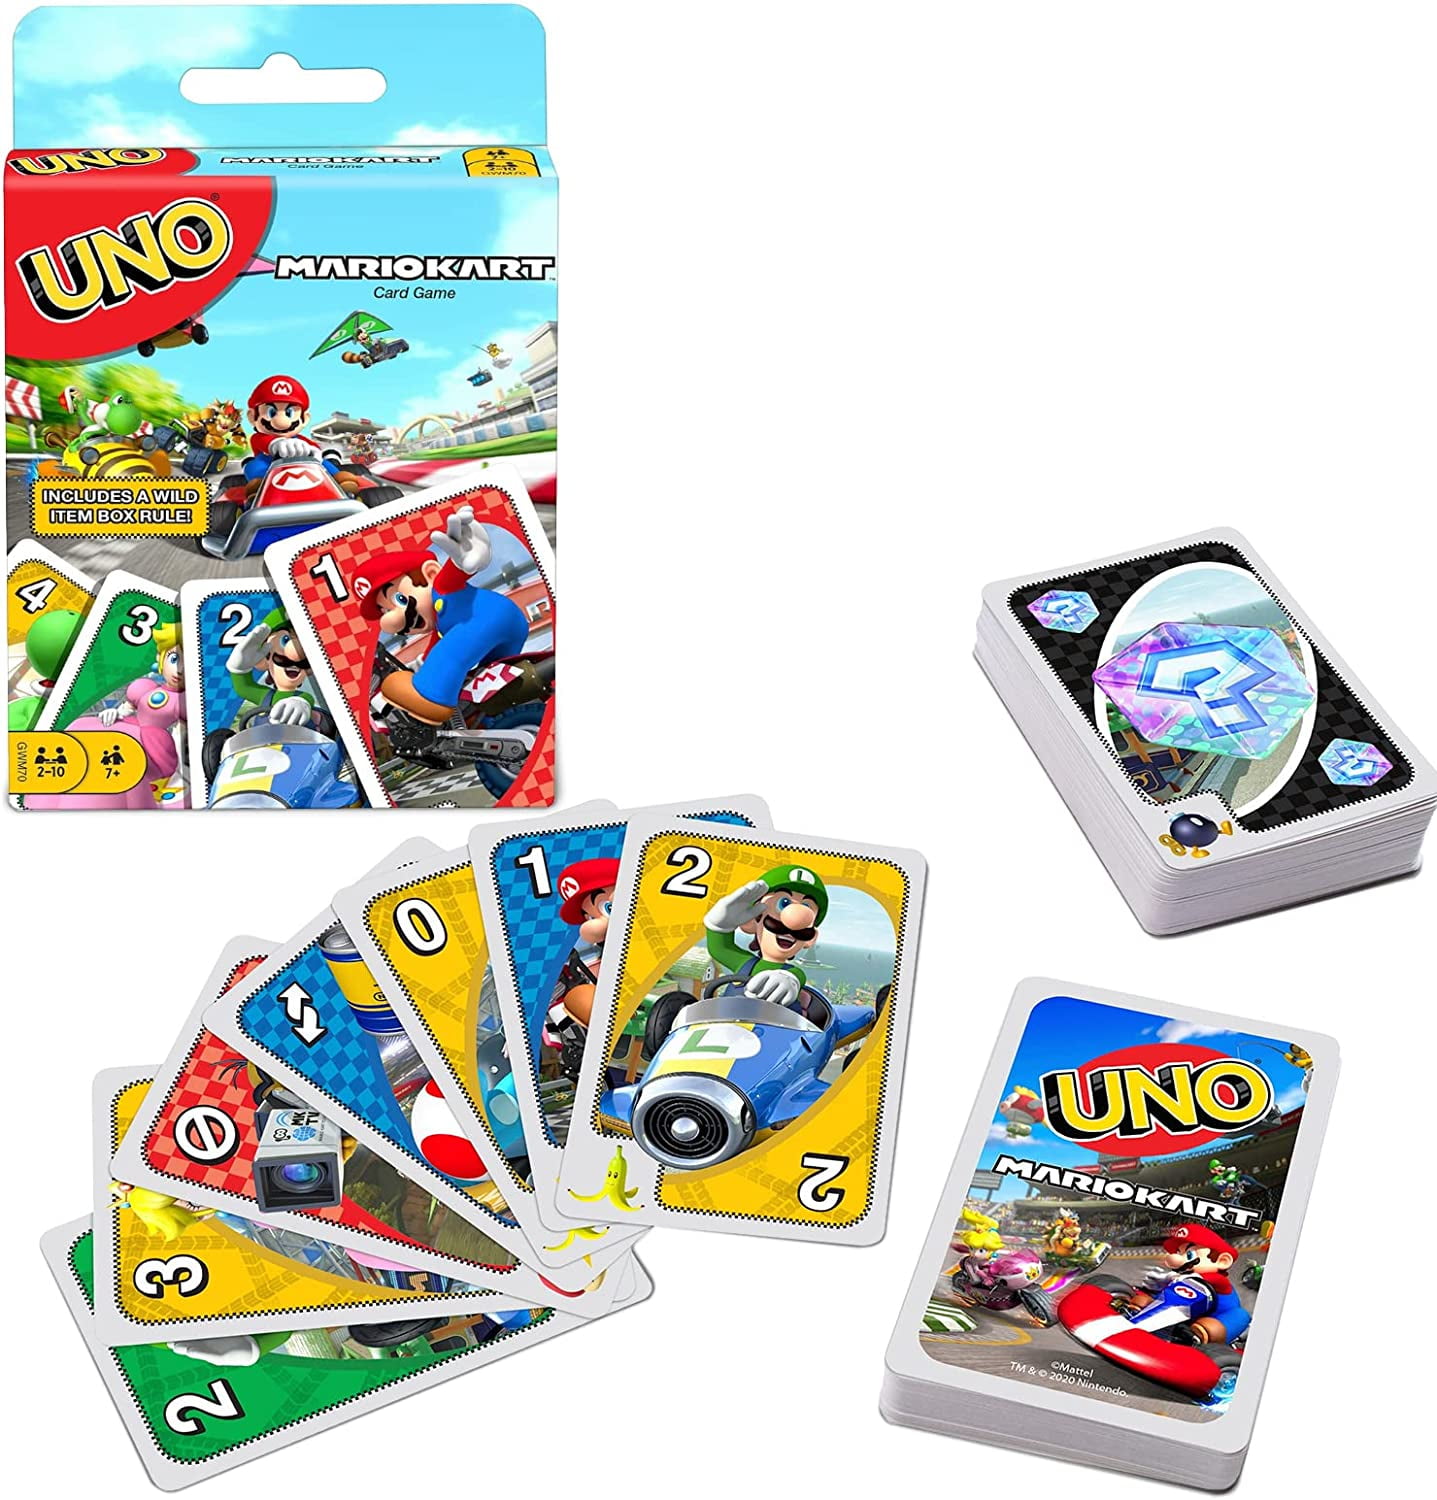 UNO MARIO KART Game Rules - How To Play UNO MARIO KART